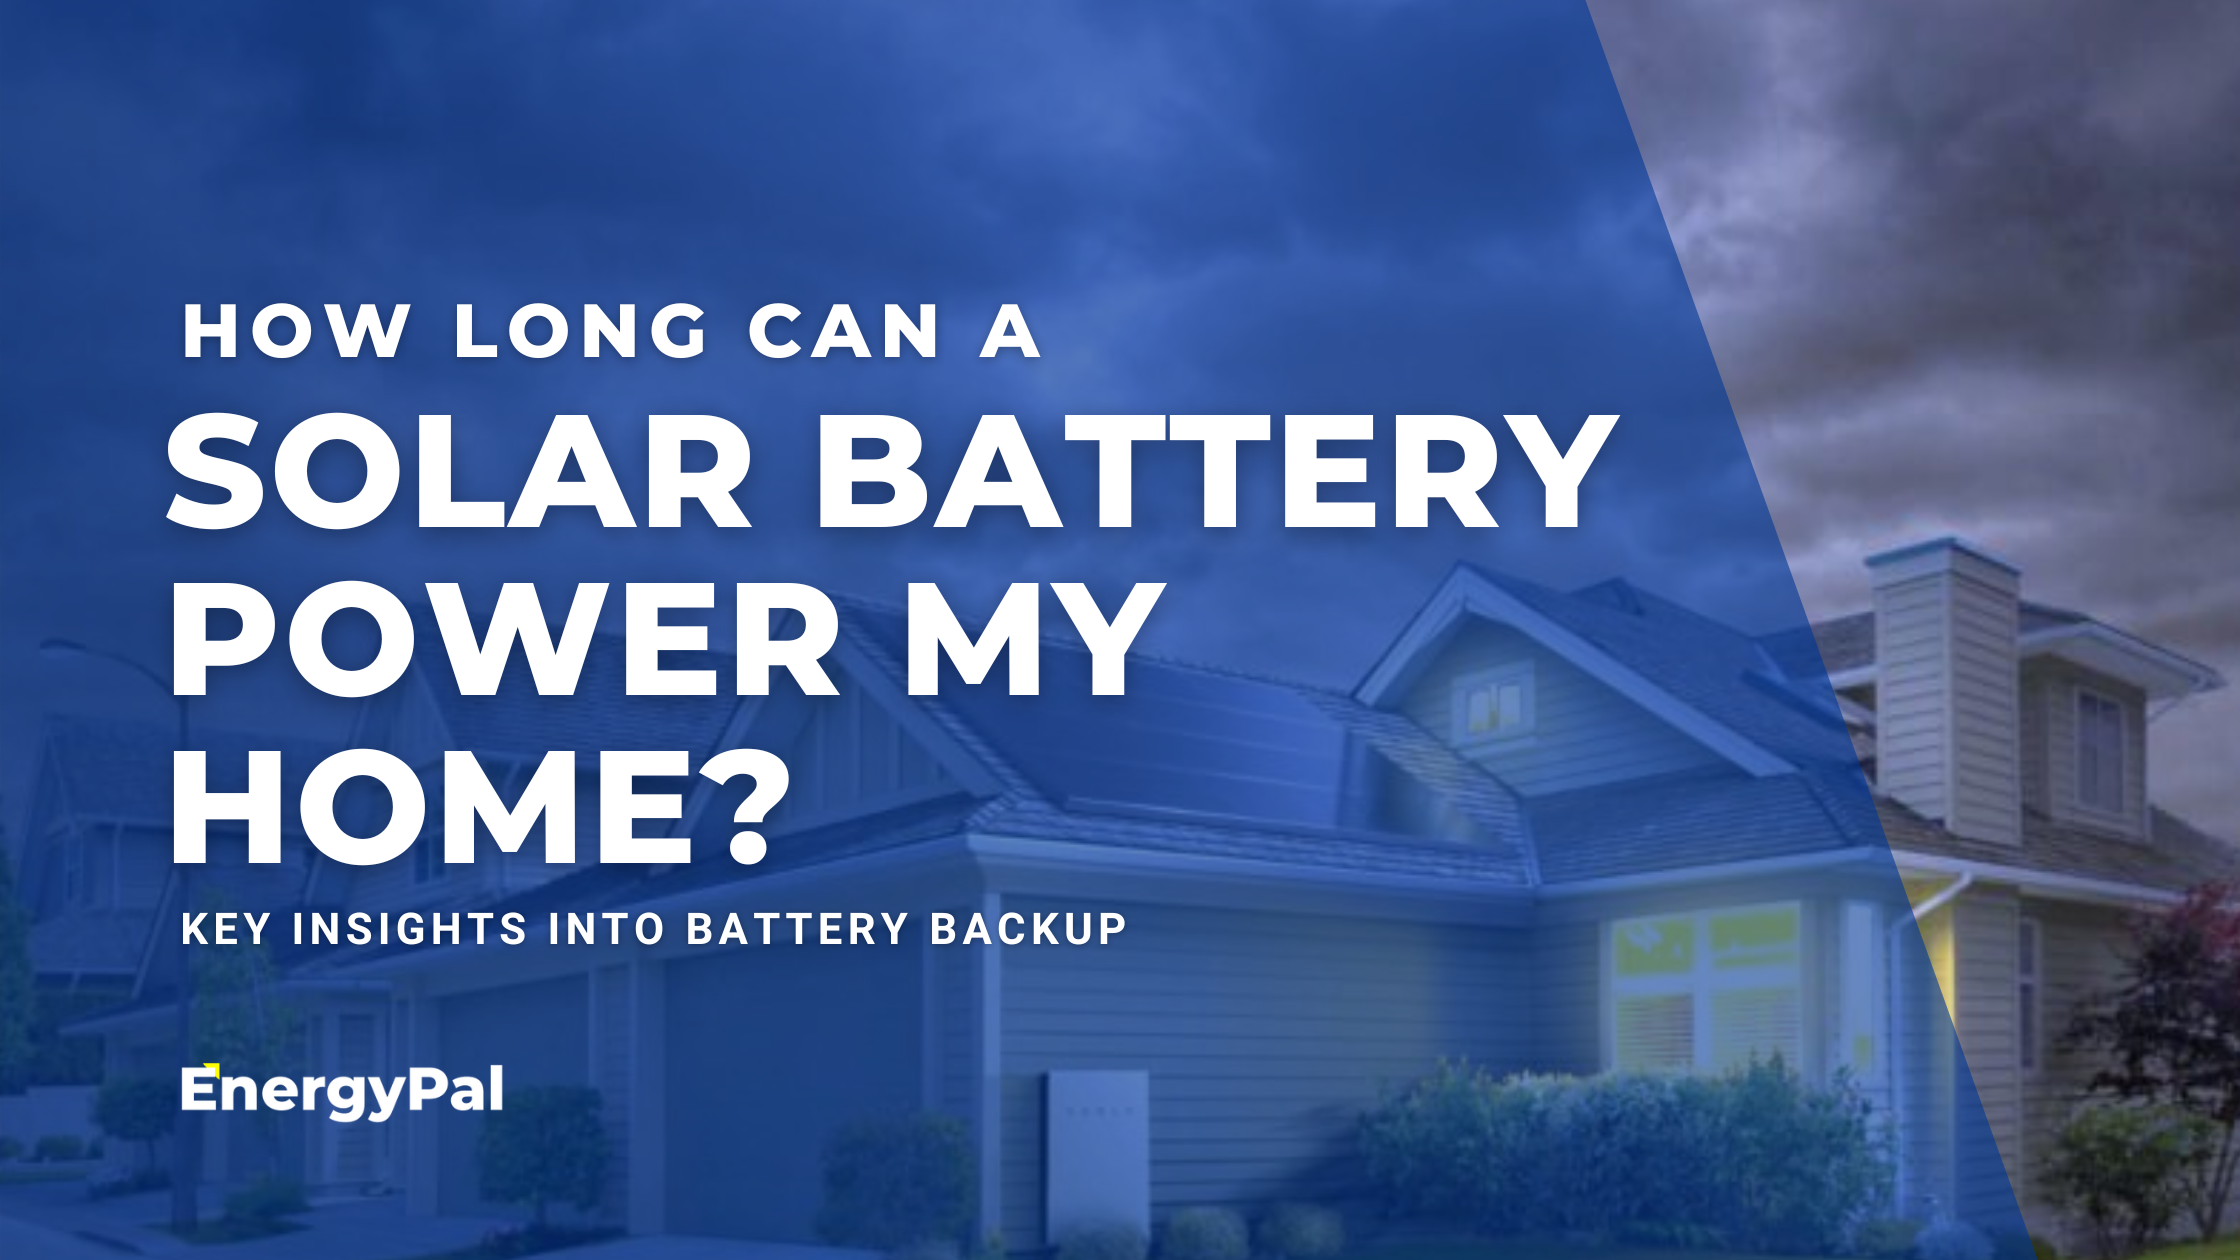 How Long Can A Solar Battery Power Your House?